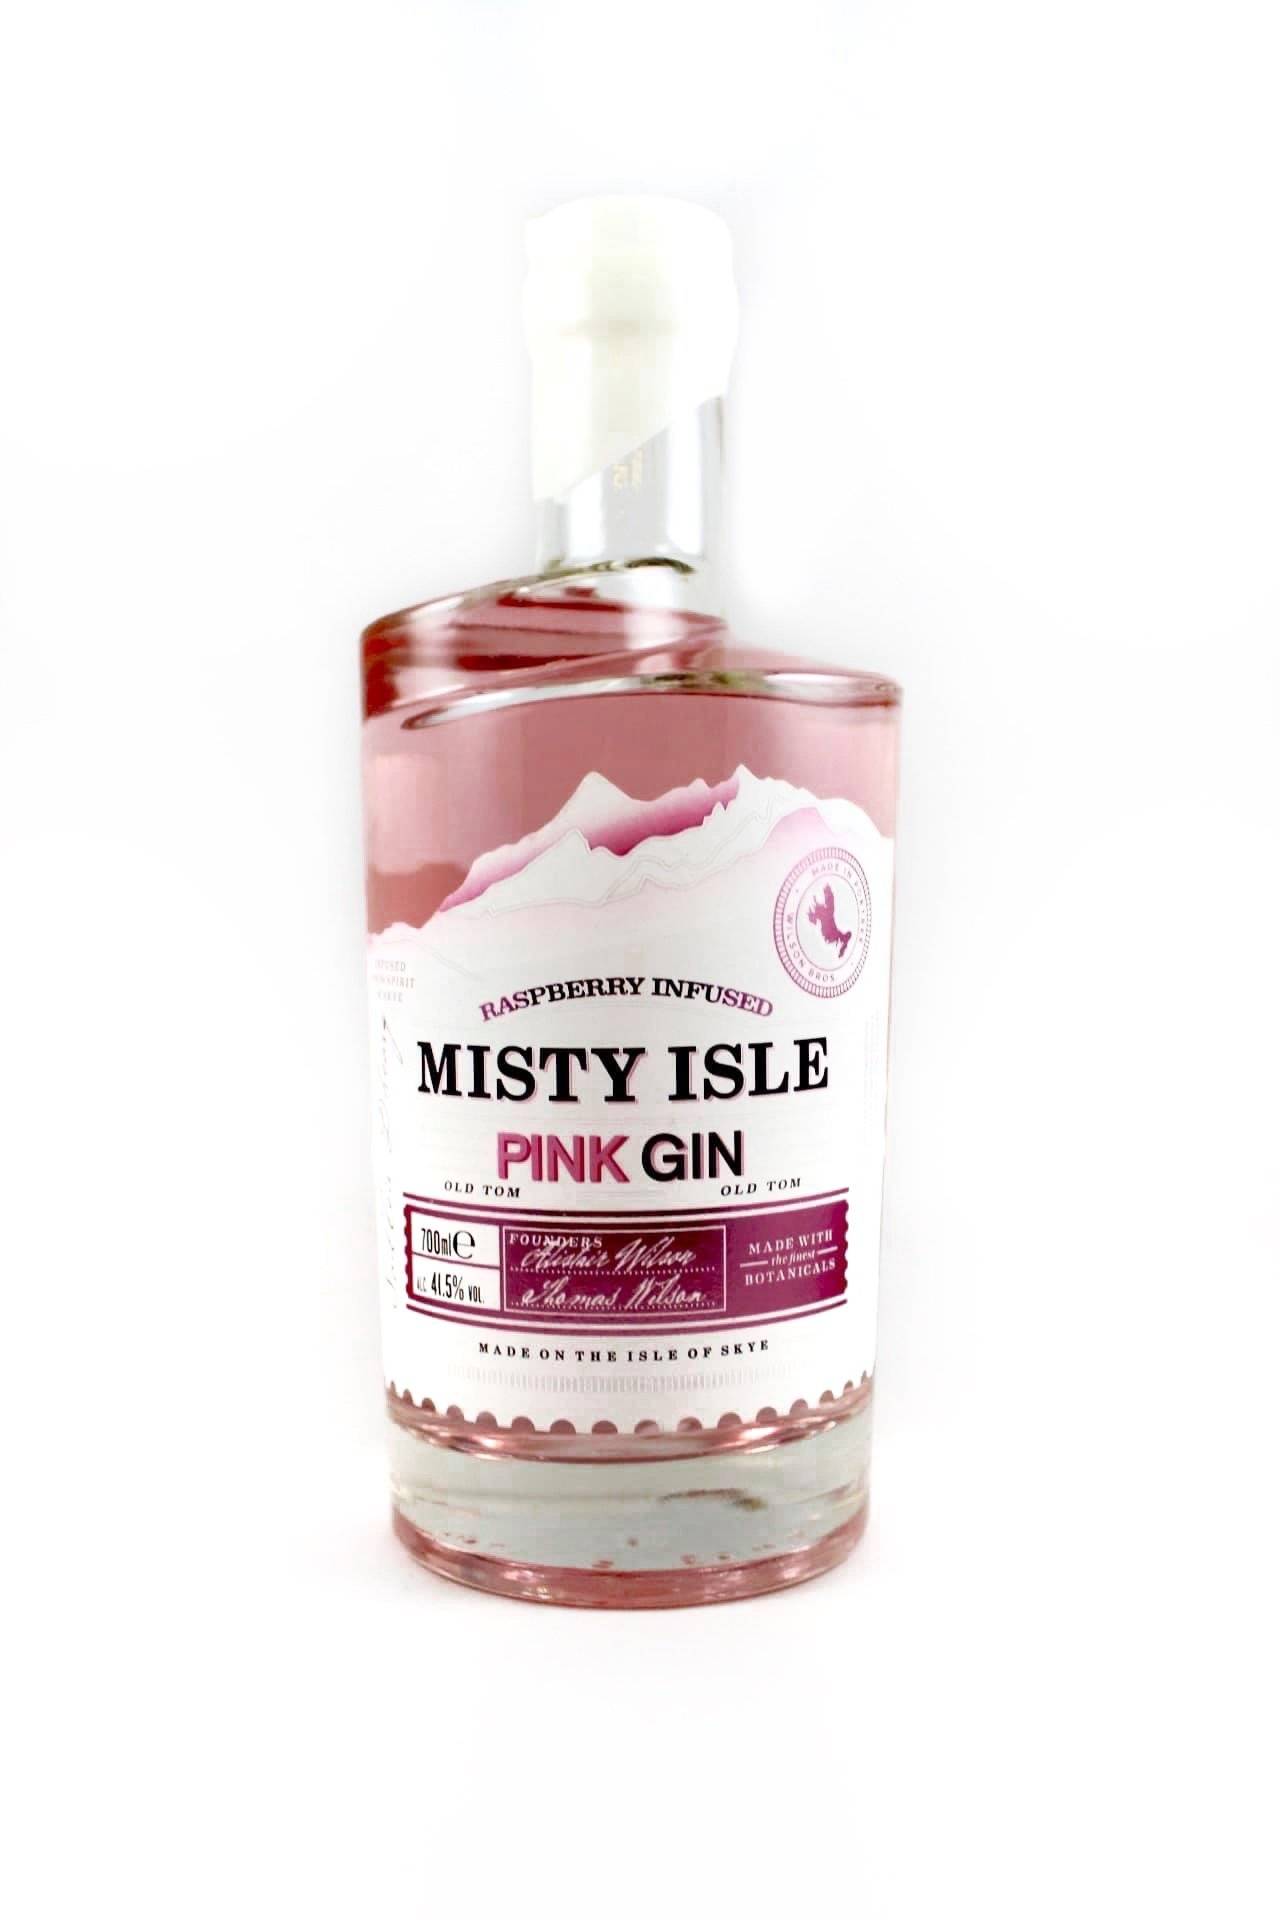 Misty Isle Pink Gin Gins & Gin Liqueurs